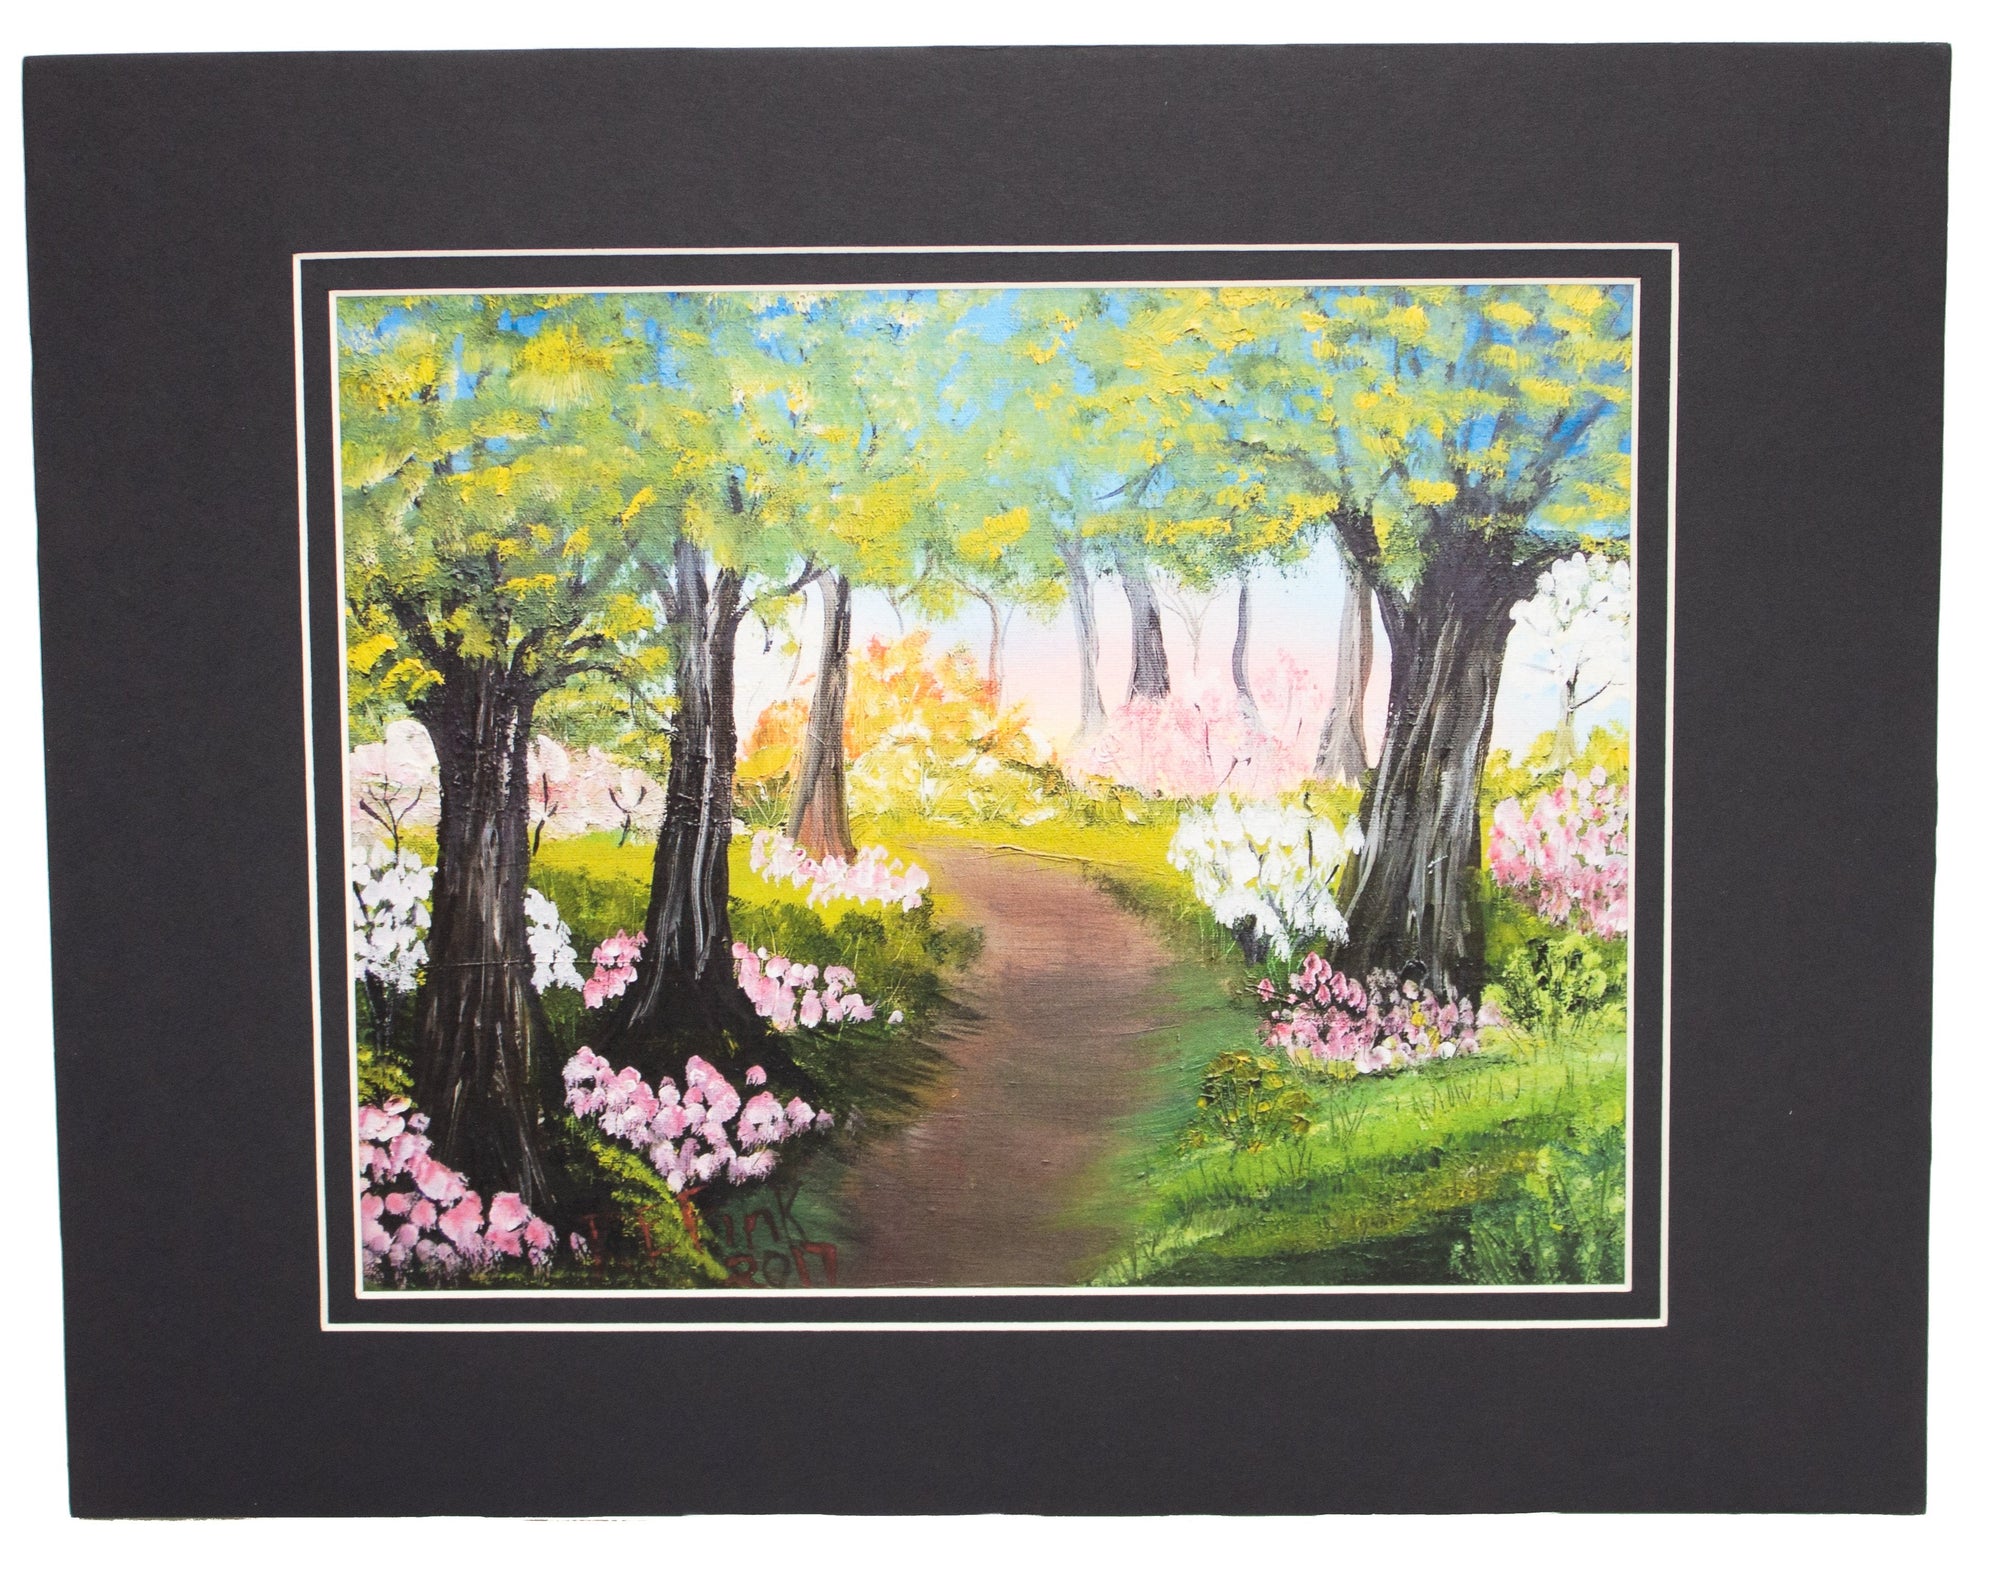 "Stroll in the Park" Matted Print (8x10)